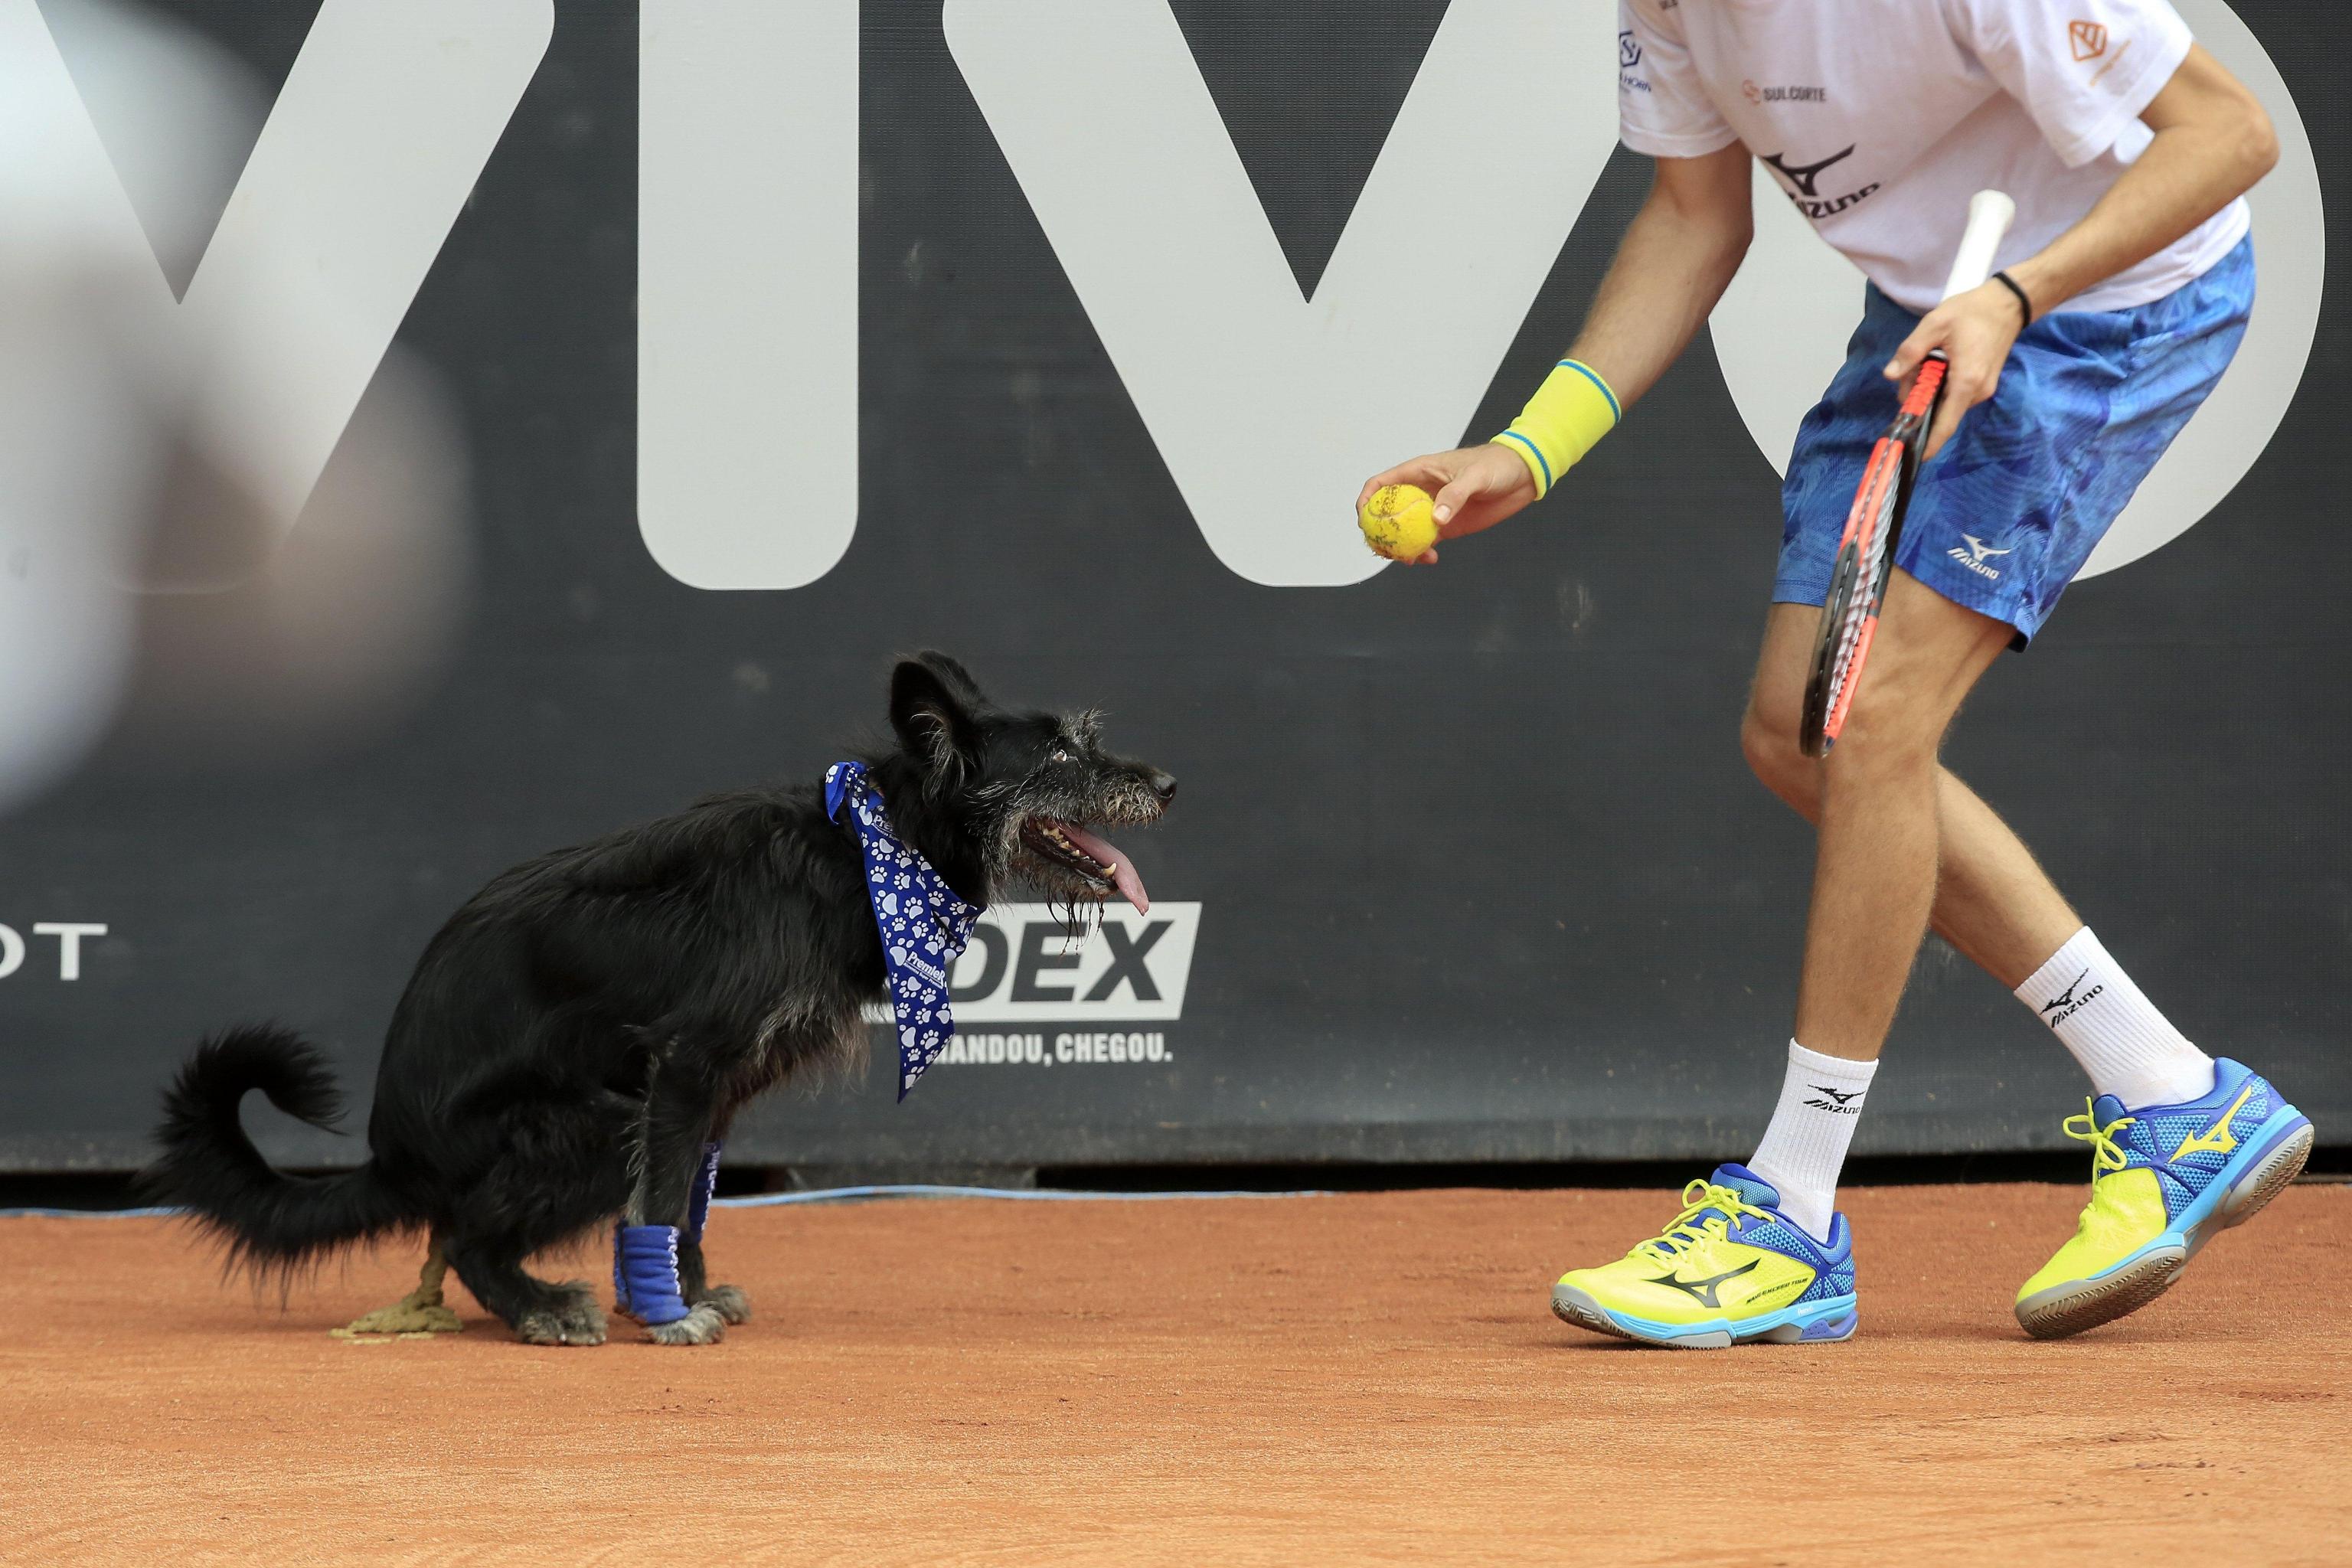 epa05829862 A trained dog collects tennis balls, during an exhibition event aimed at promoting the adoption of stray animals, during their ATP 250 Brazil Open 2017 in Sao Paulo, Brazil, 04 March 2017. EPA/Sebastiao Moreira